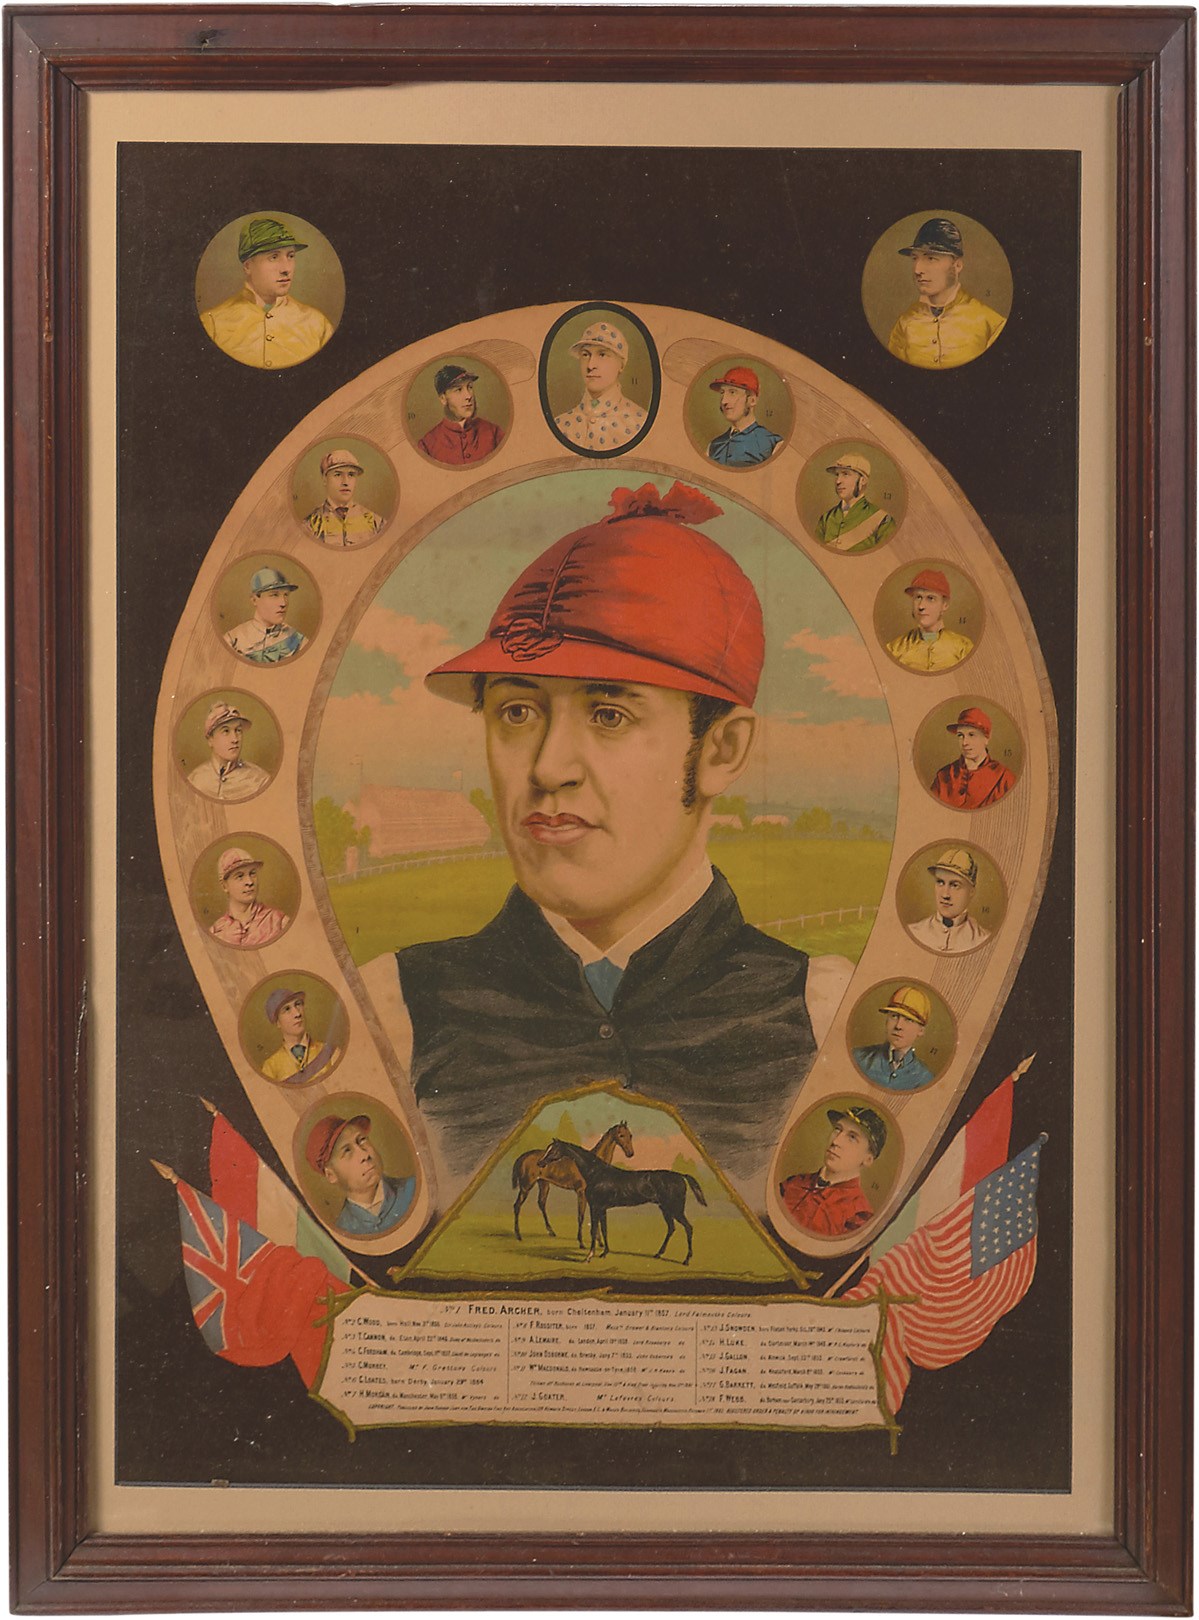 1882 Fred Archer & World's Greatest Jockeys Huge Lithograph - Only One Known